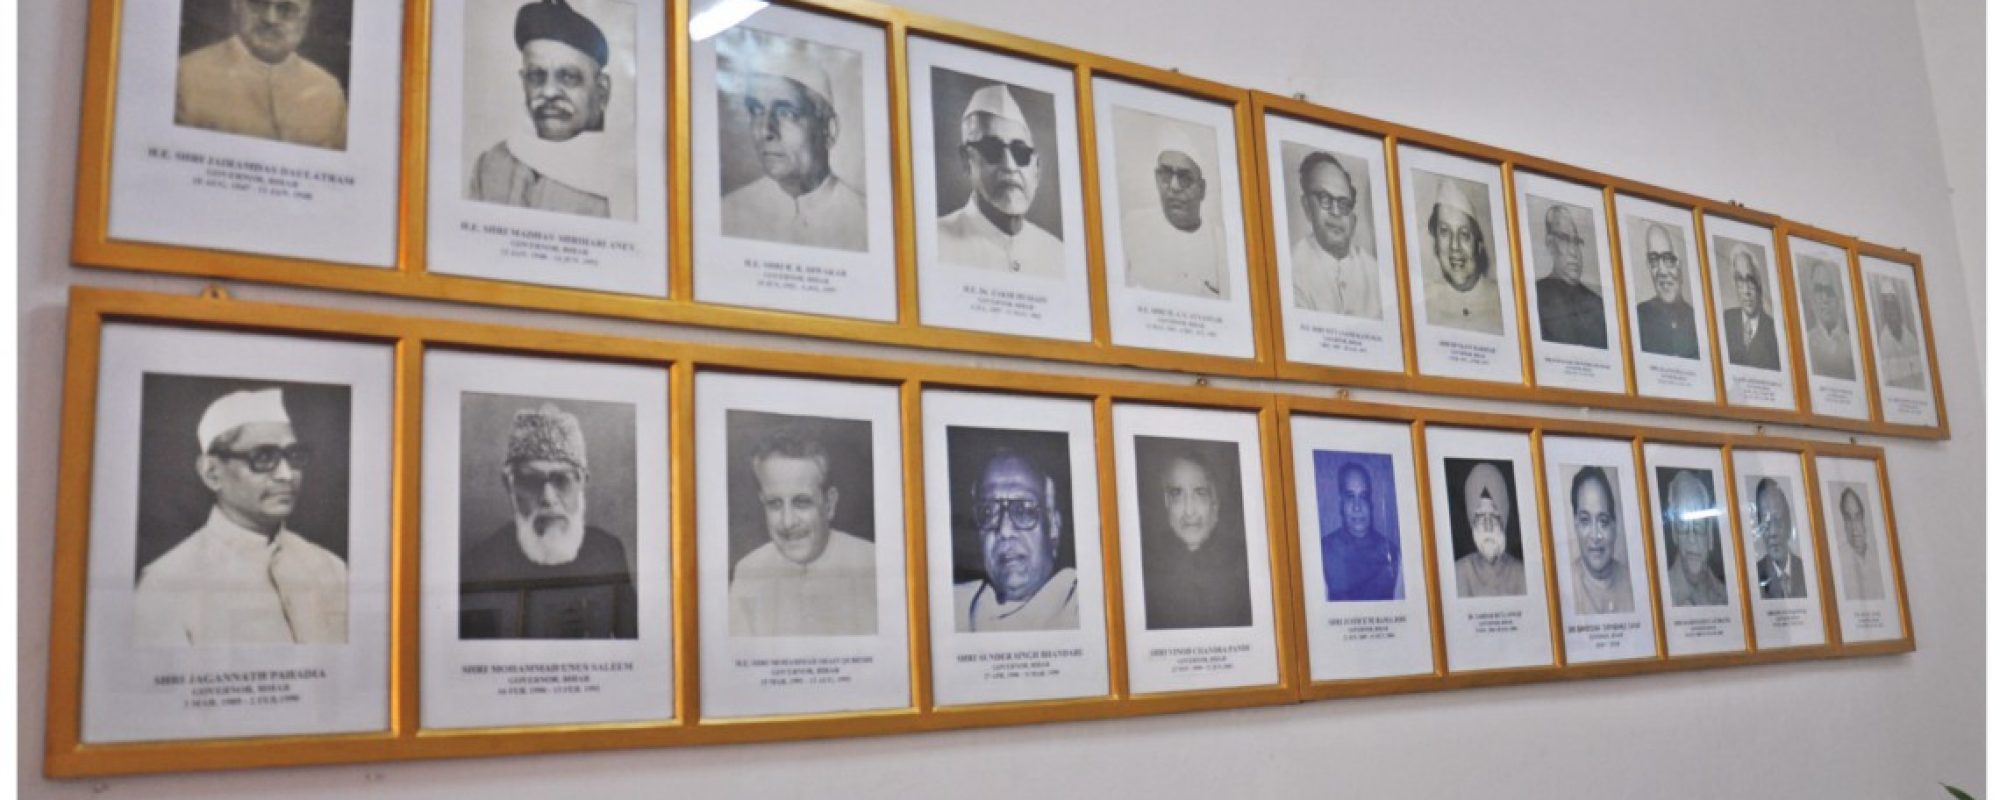 Portraits of former Governors hung on the walls of the ground floor in Bihar Raj Bhavan